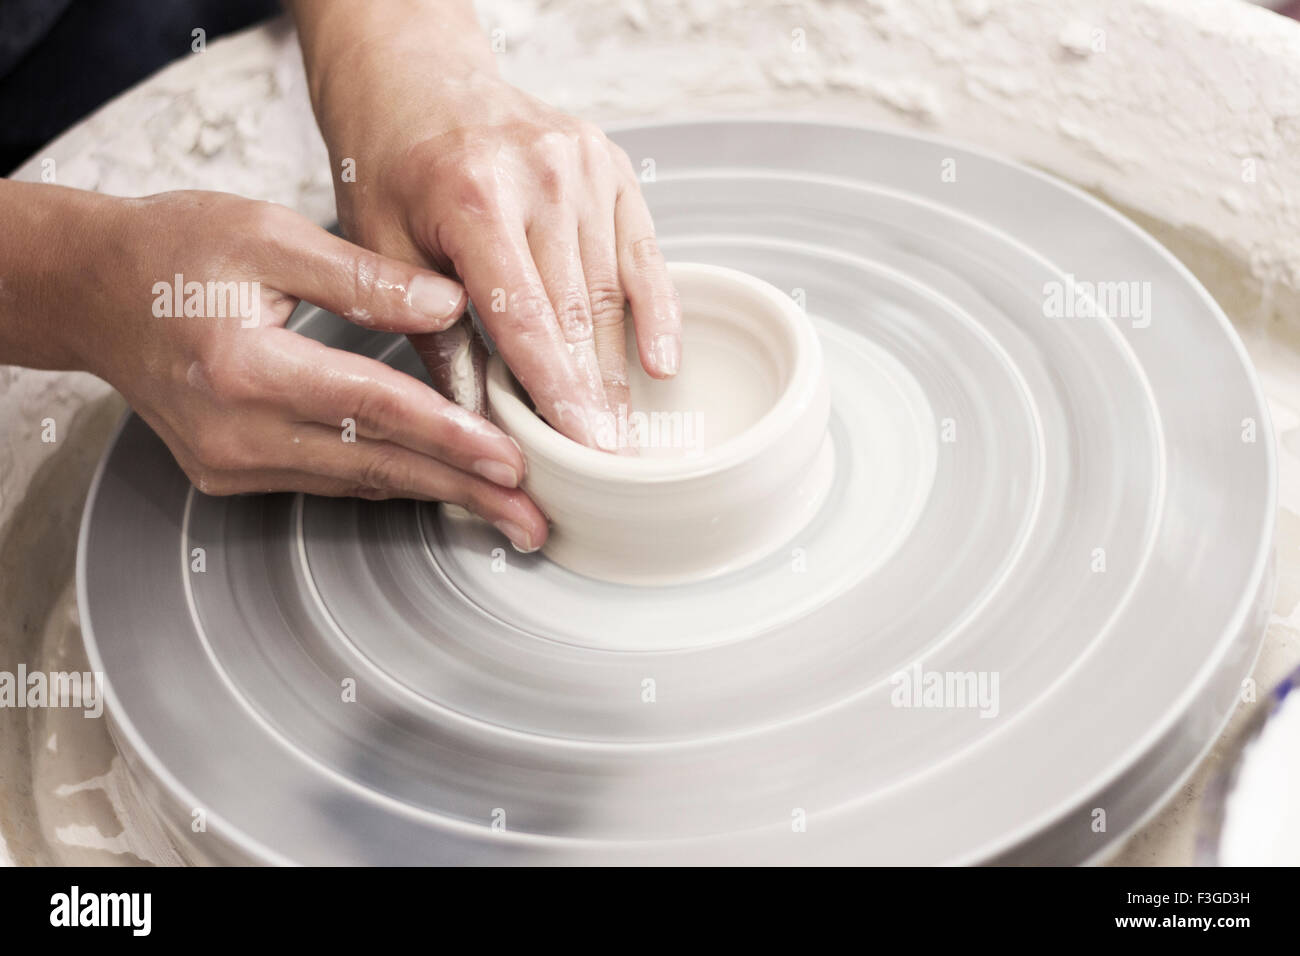 Potter creates a cup and saucer on the pottery wheel from raw white clay Stock Photo